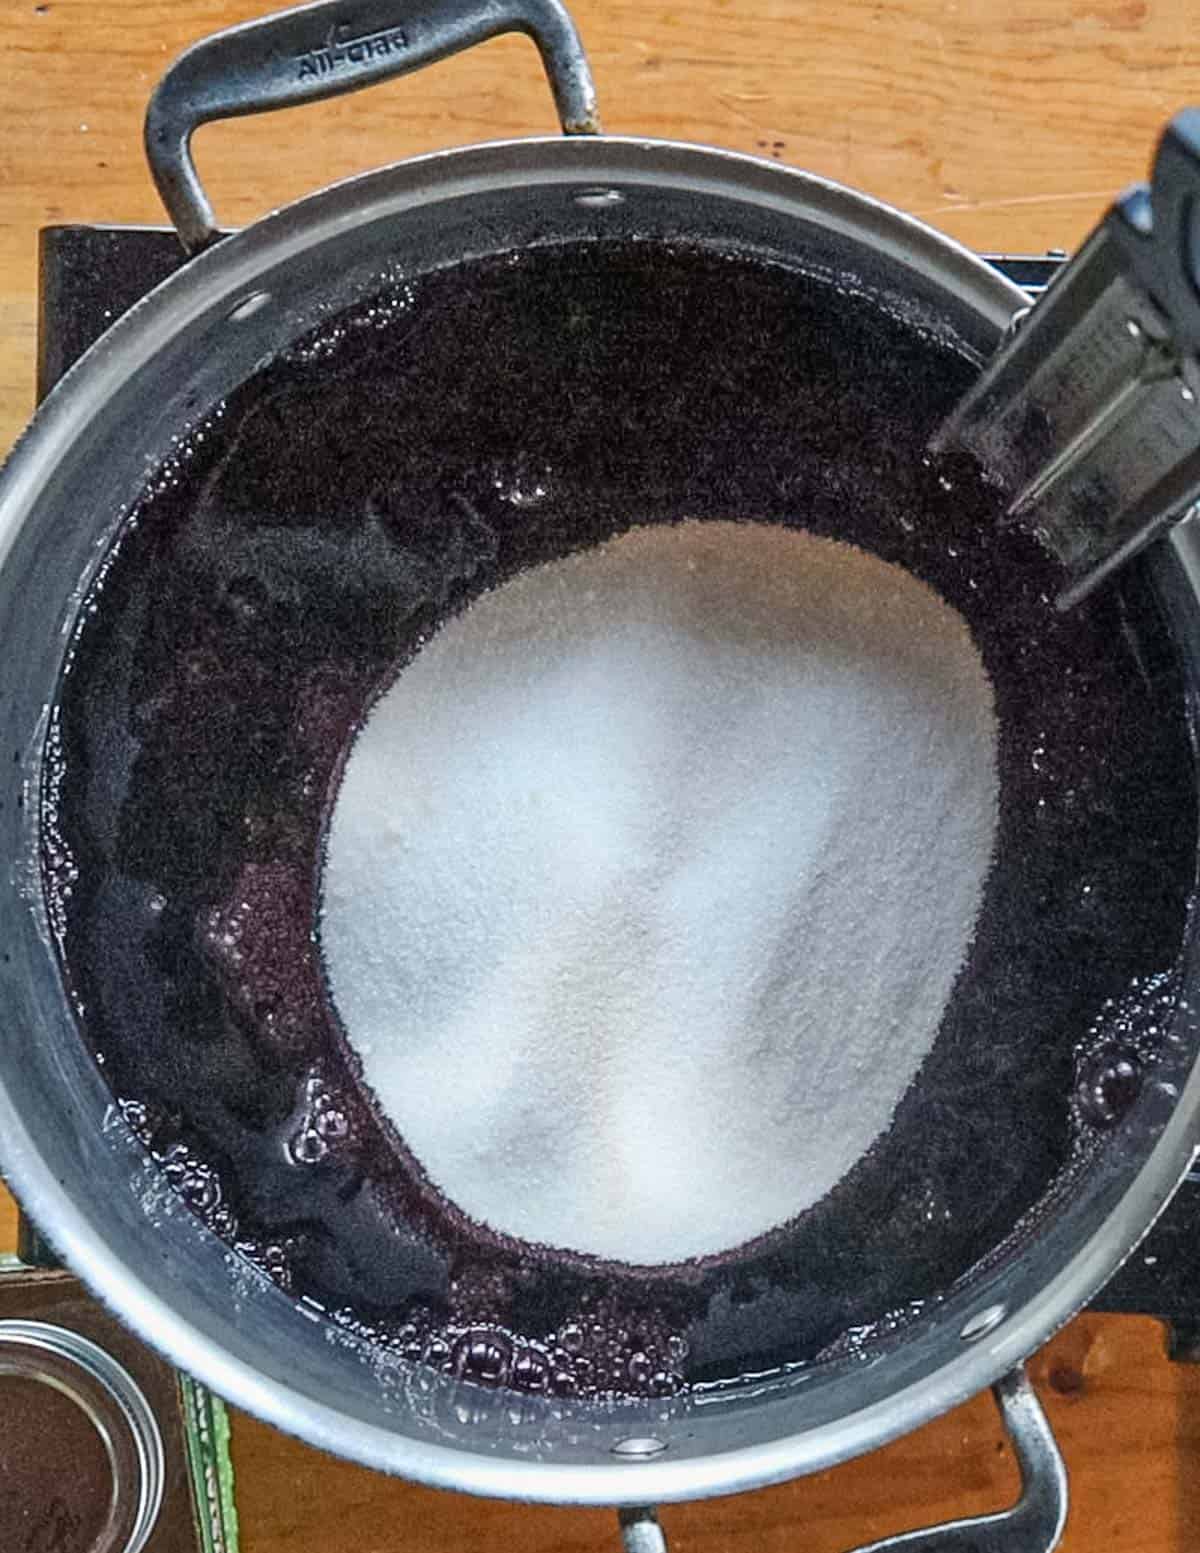 Sugar and pectin being mixed with wild grape juice to make jelly. 